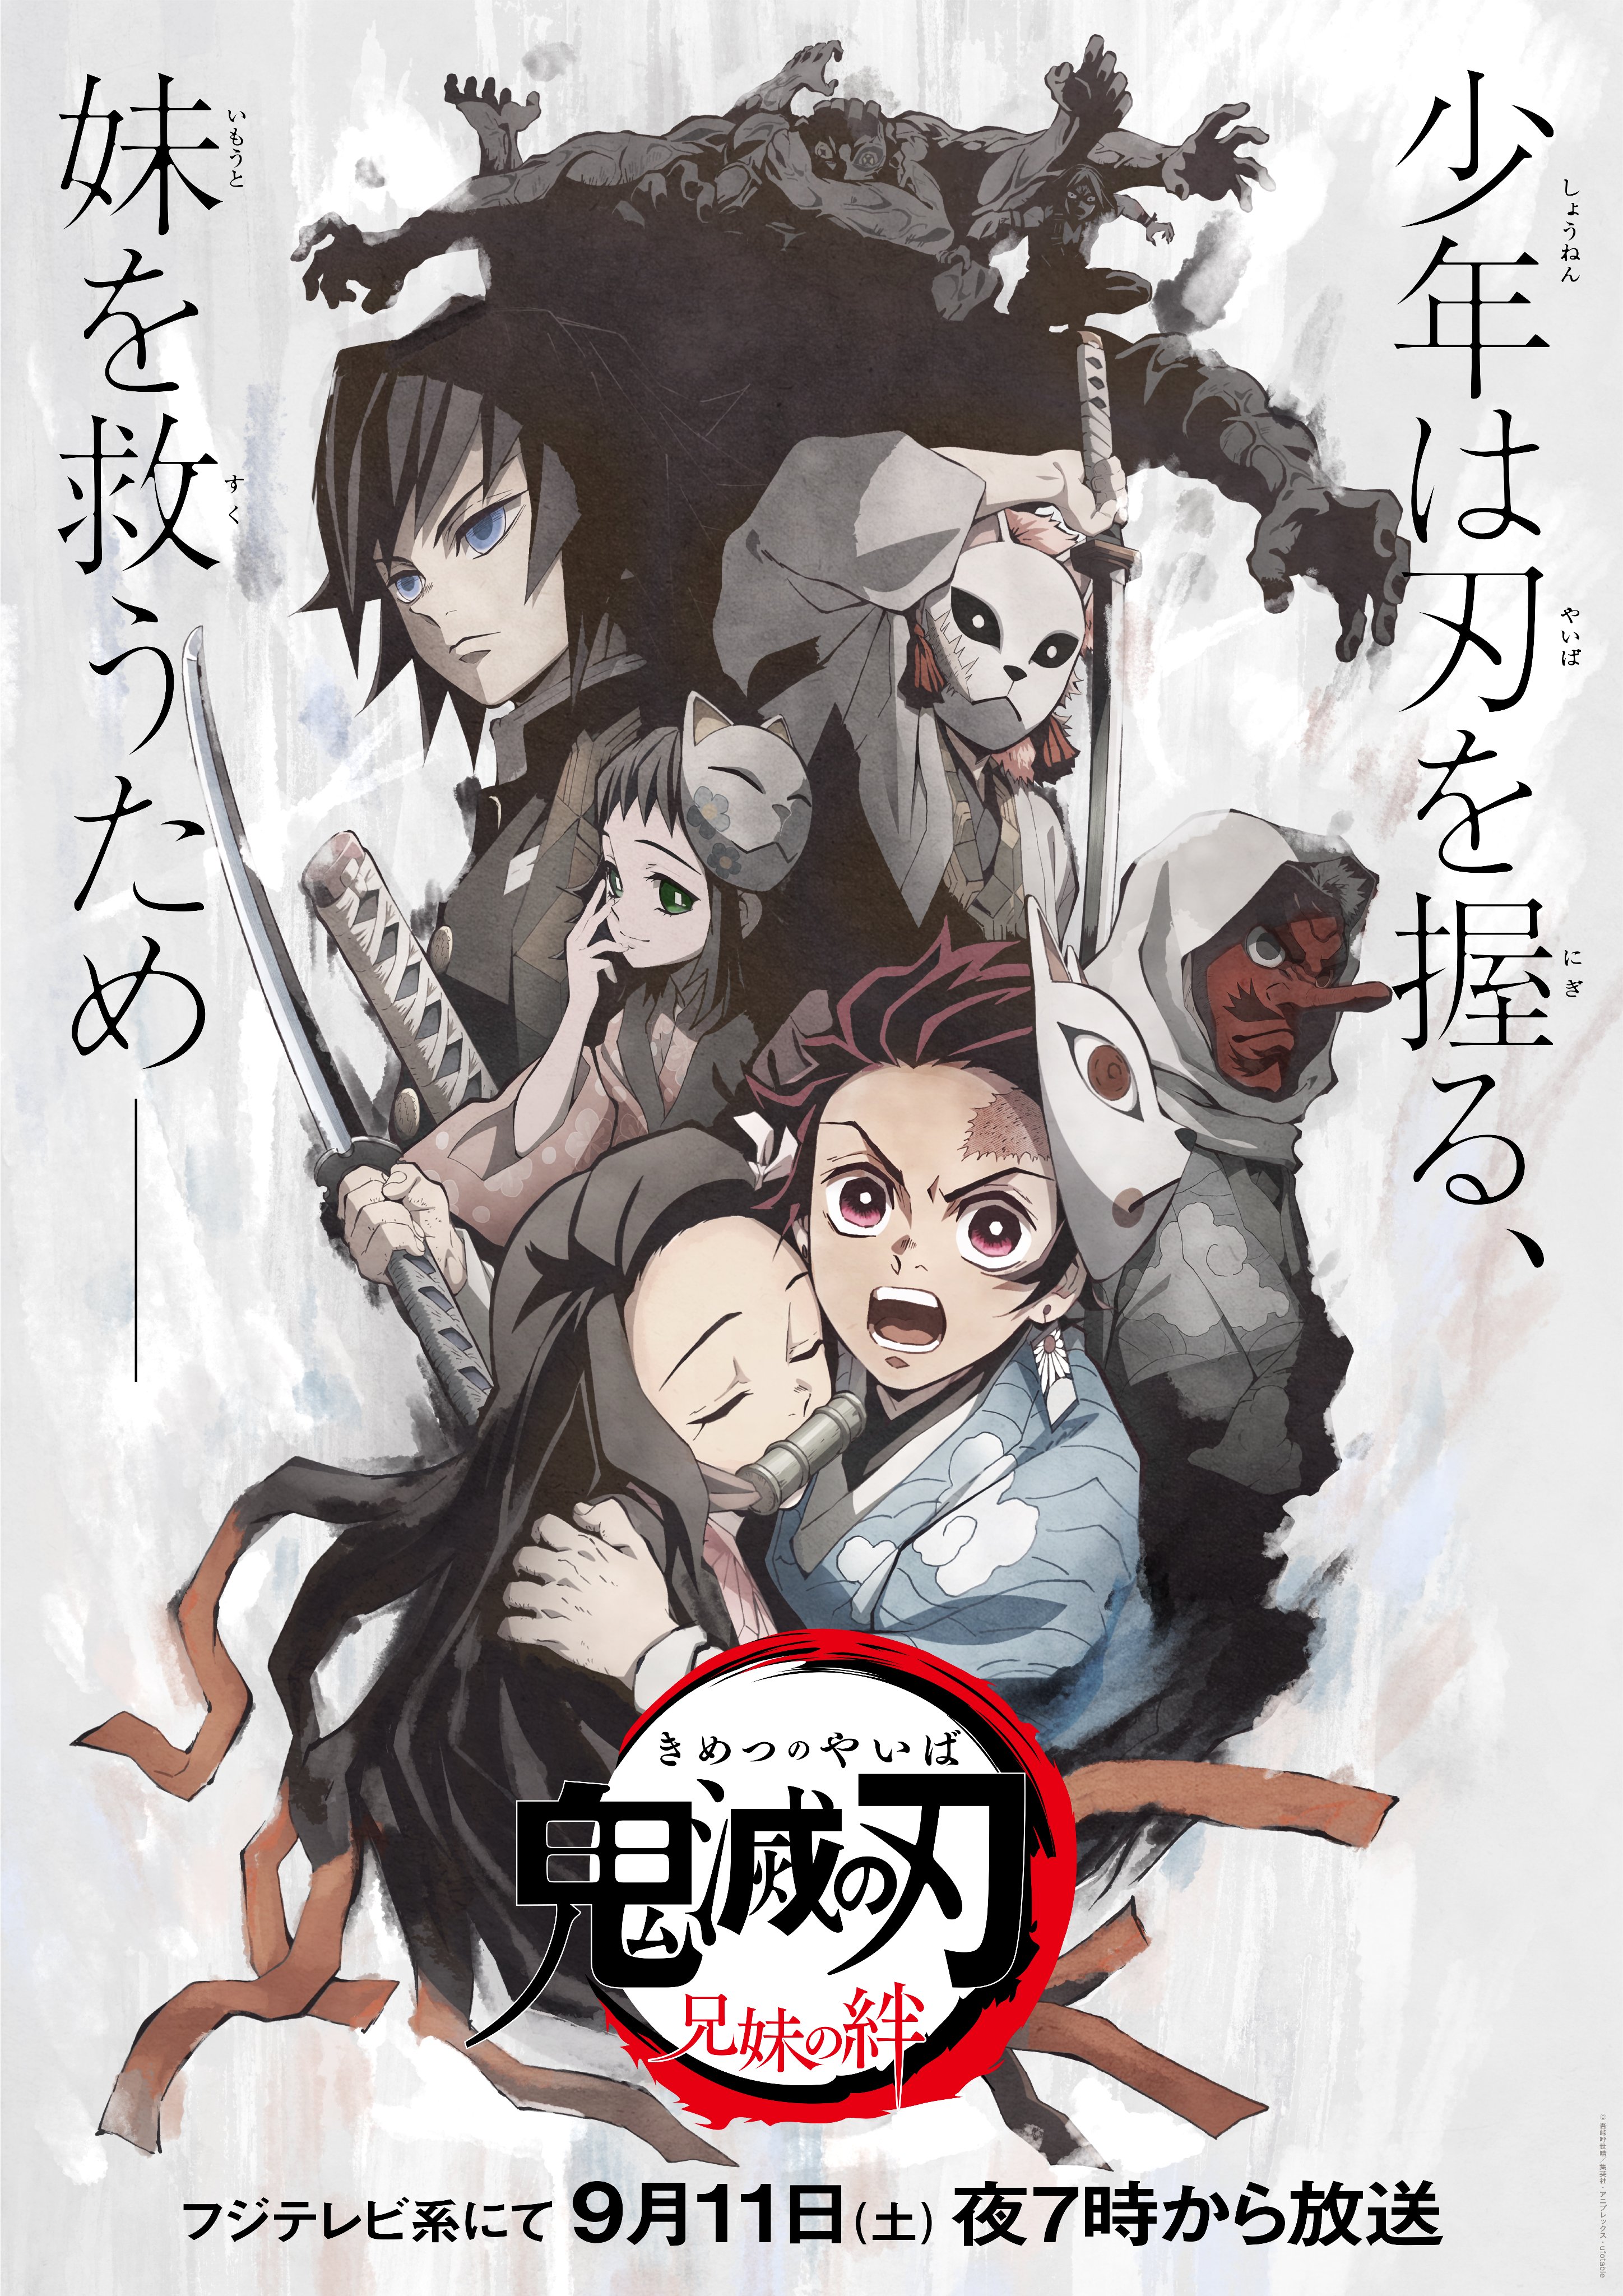 Crunchyroll - New Demon Slayer Season 1 TV Anime Visuals Released for  Compilation Specials